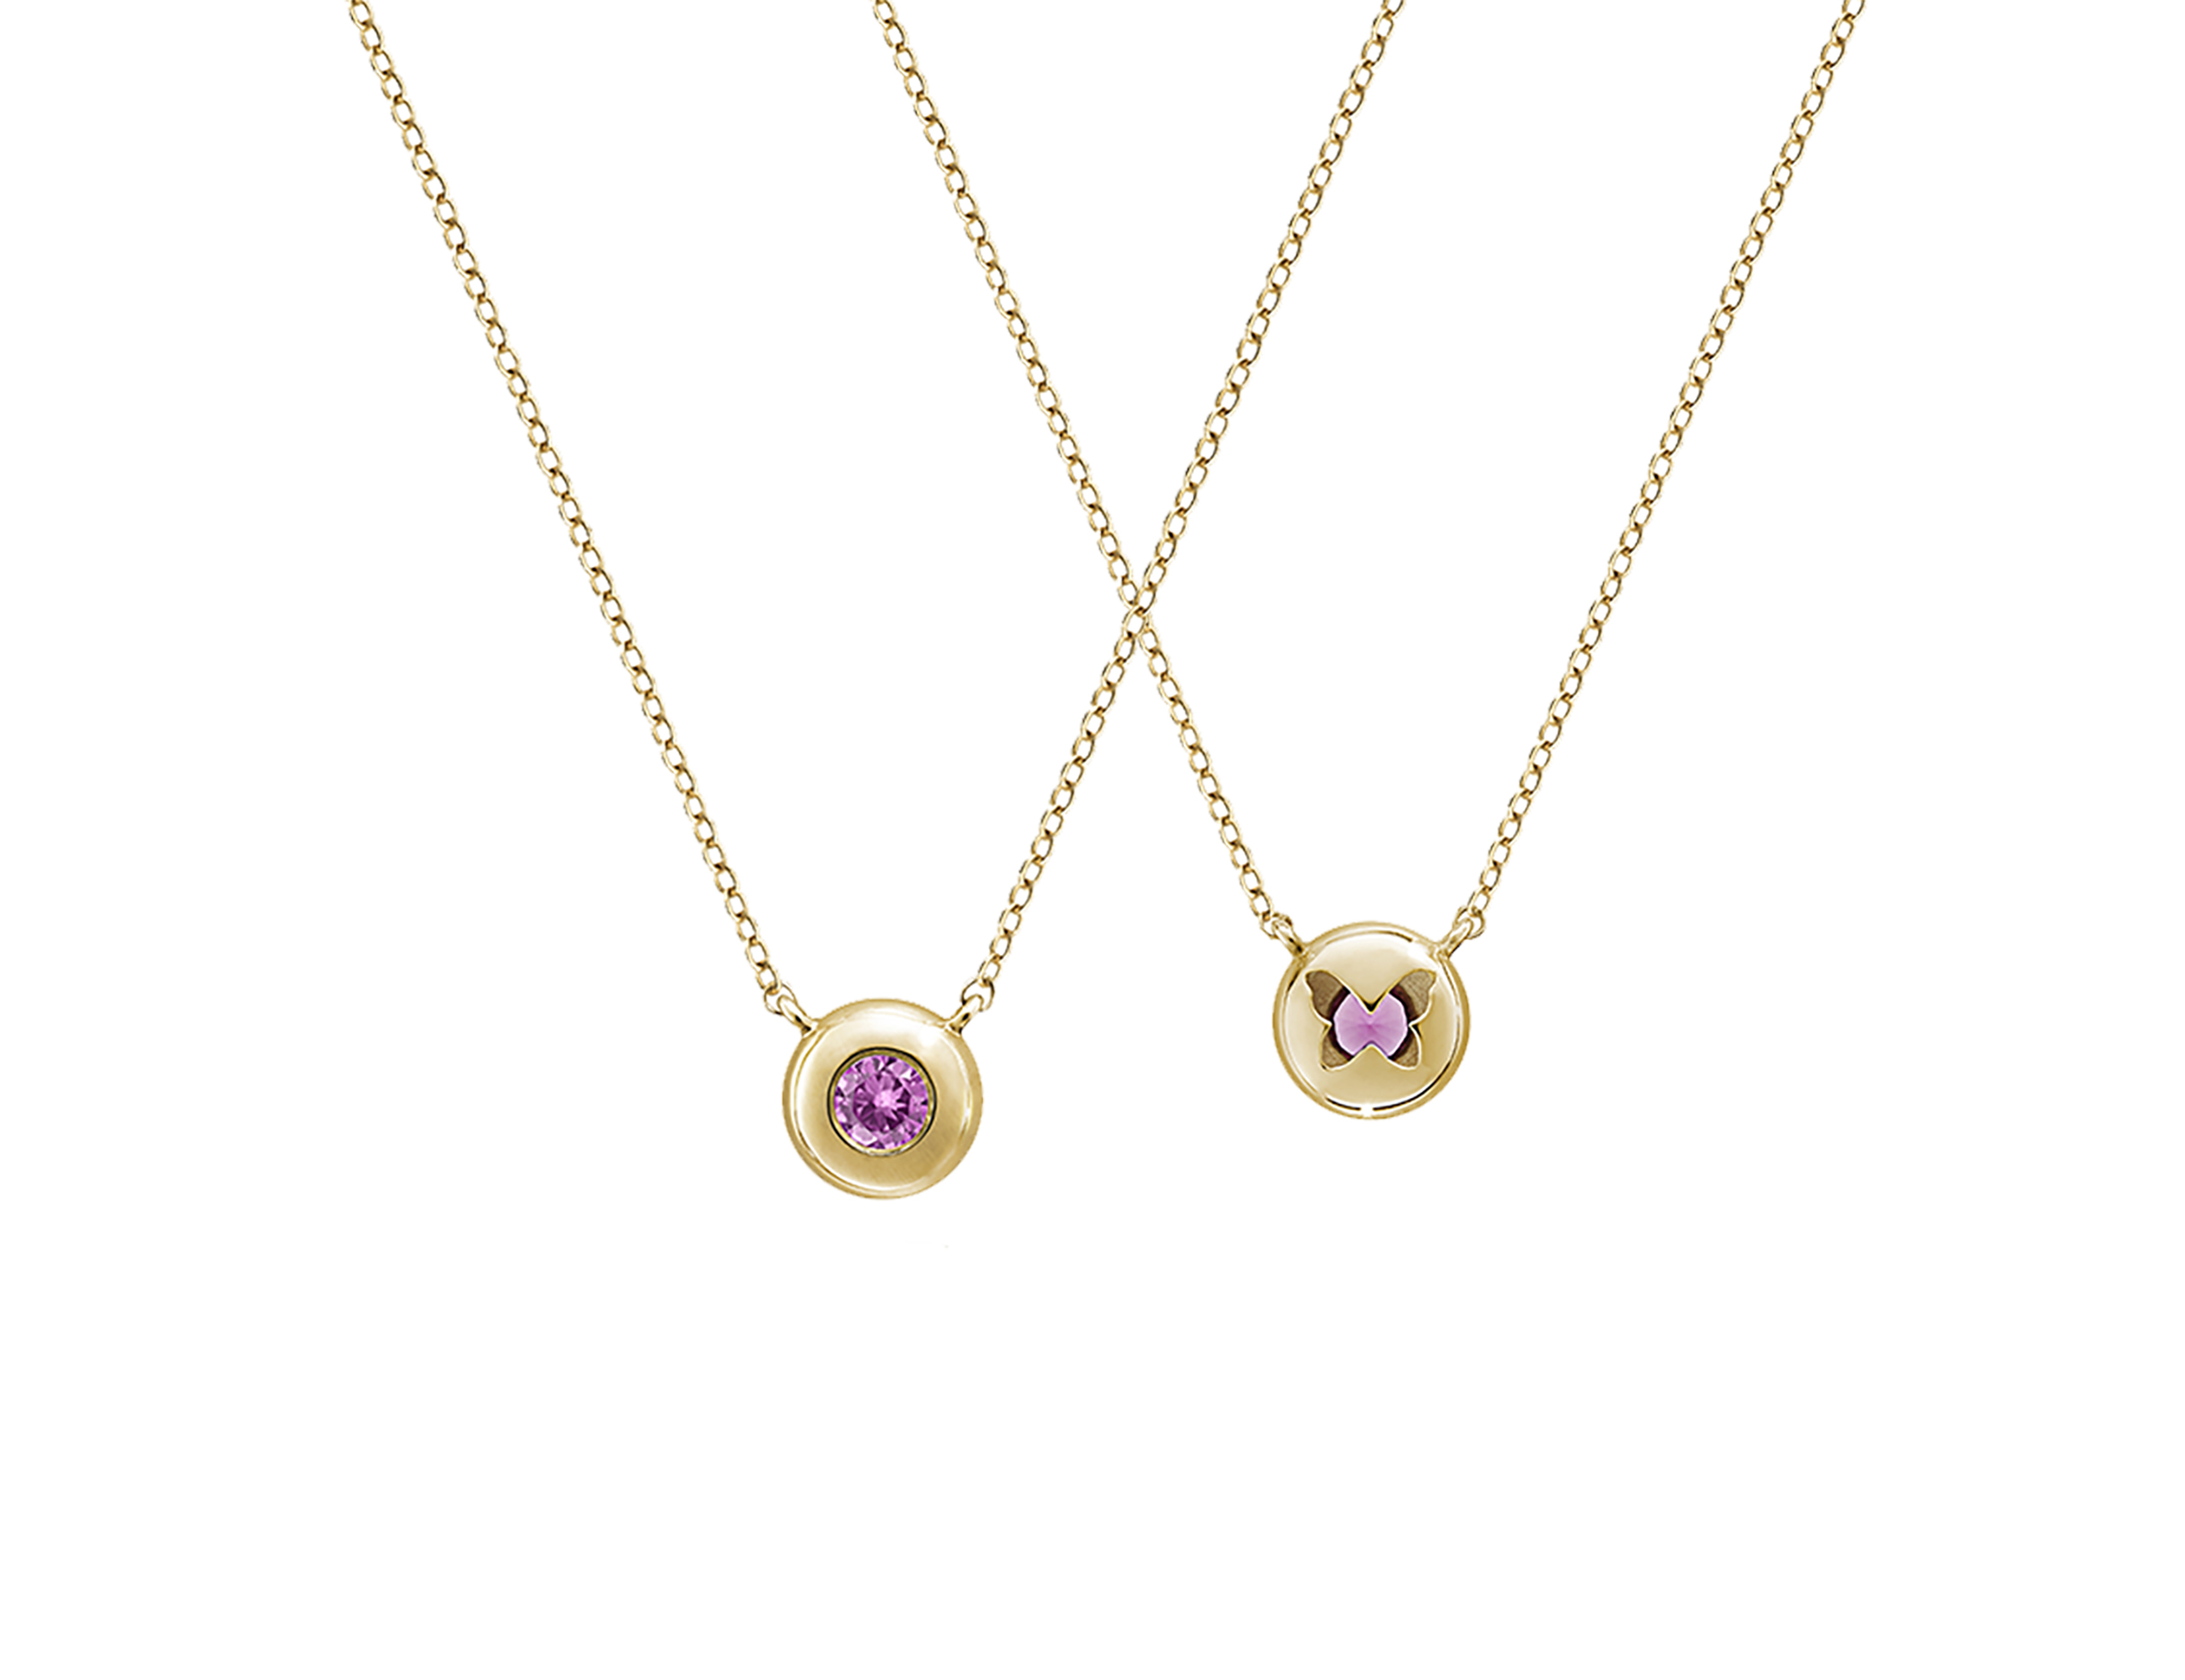 Pink Sapphire Pendant by Annie James. Set in 14 Karat Yellow Gold, with image showing front and back views